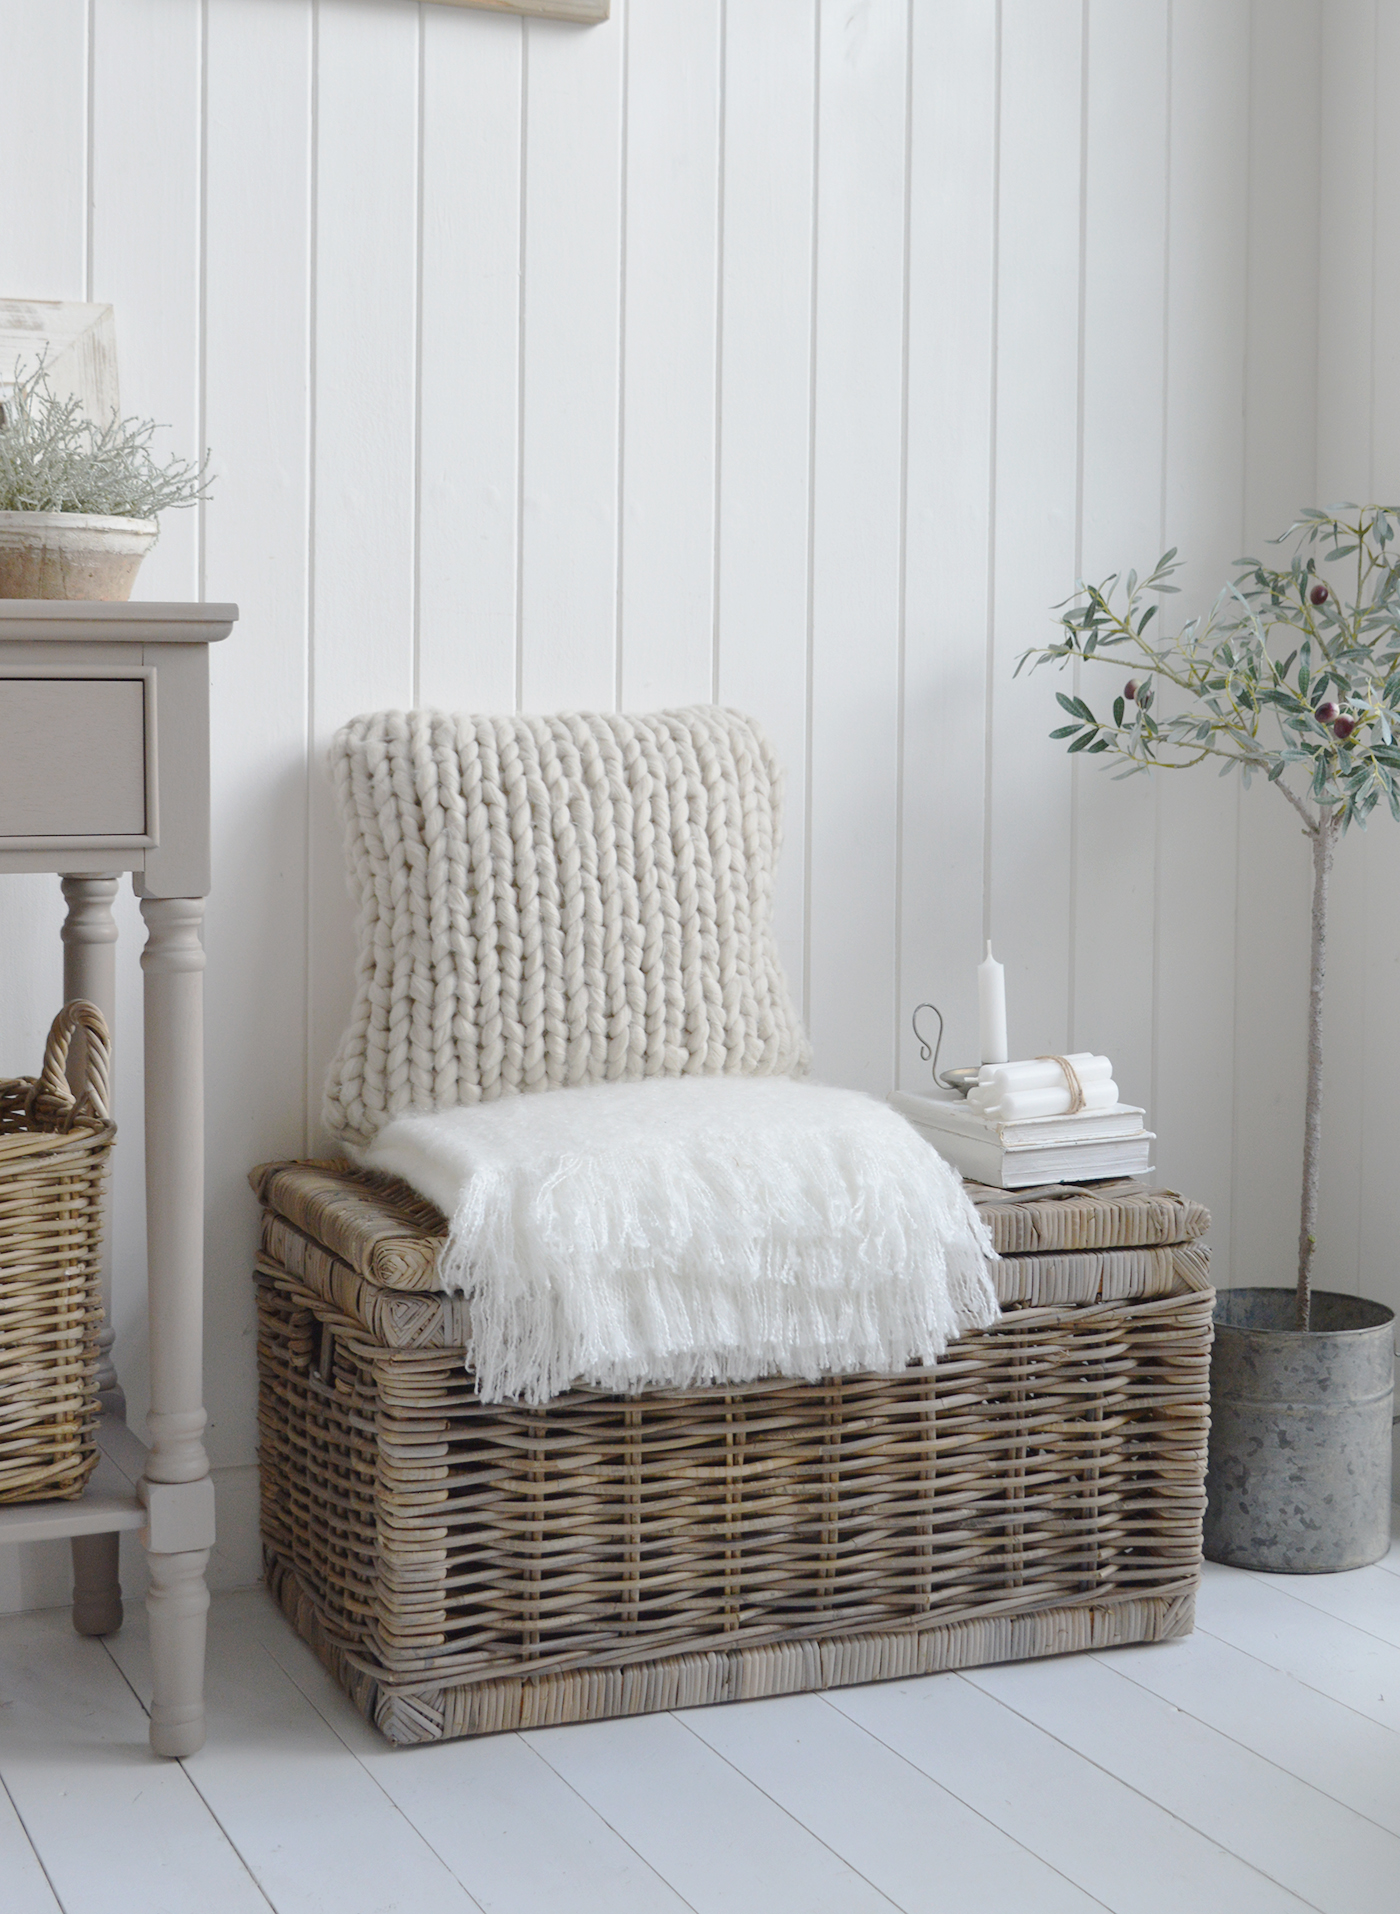 The Seaside basket, ideal storage as a pieces of furniture in a beach house interiors